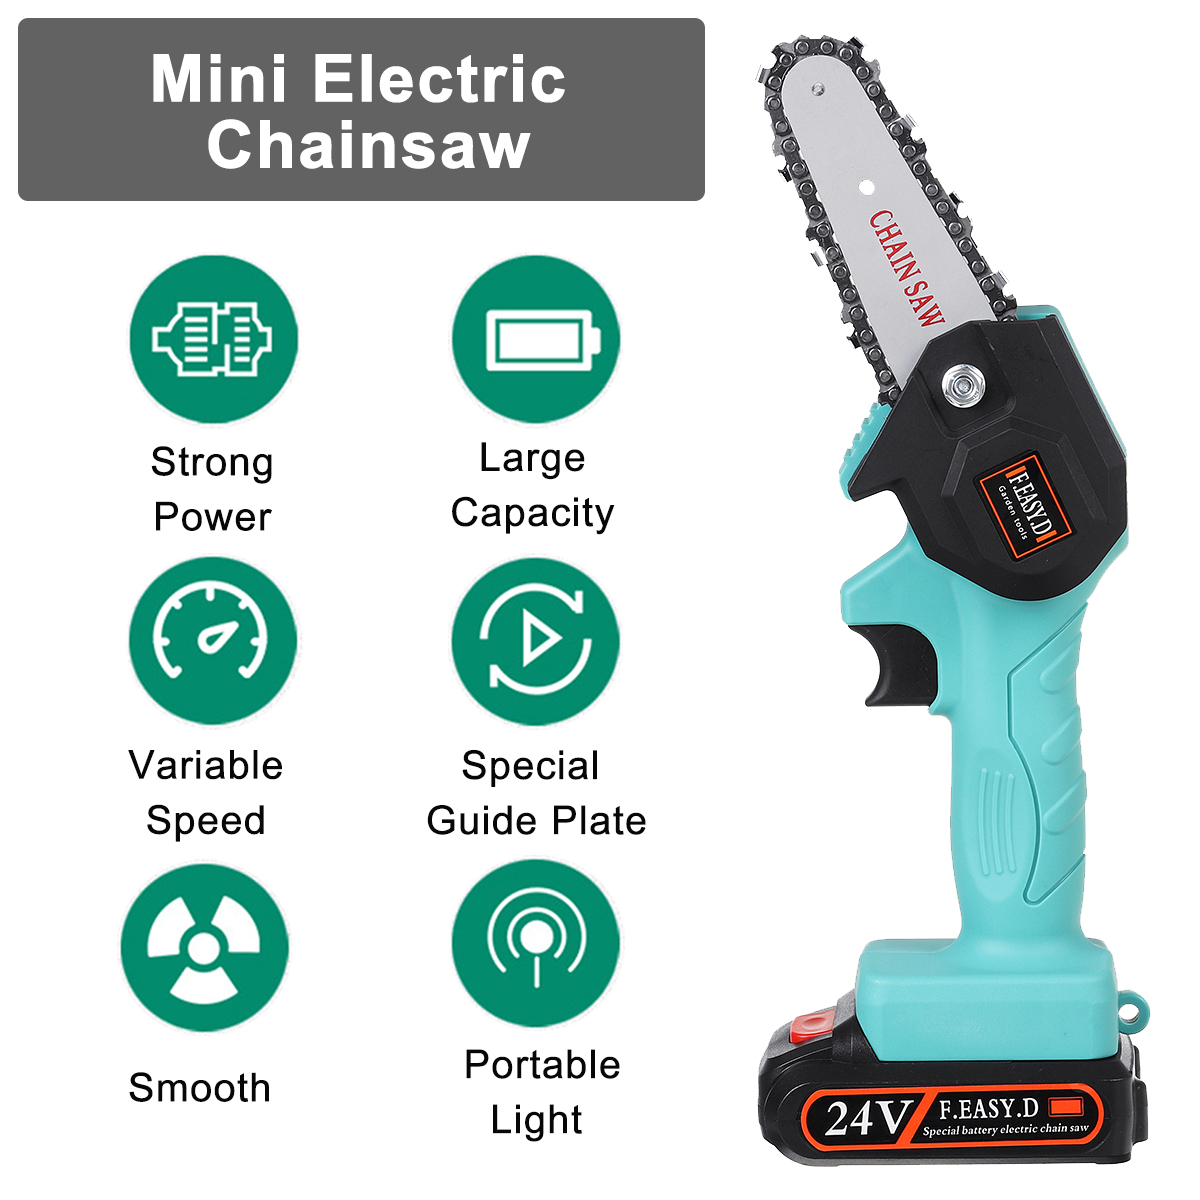 24V-550W-Rechargeable-Mini-Electric-Chainsaw-Handheld-Wood-Pruning-Saw-Kit-1777015-3